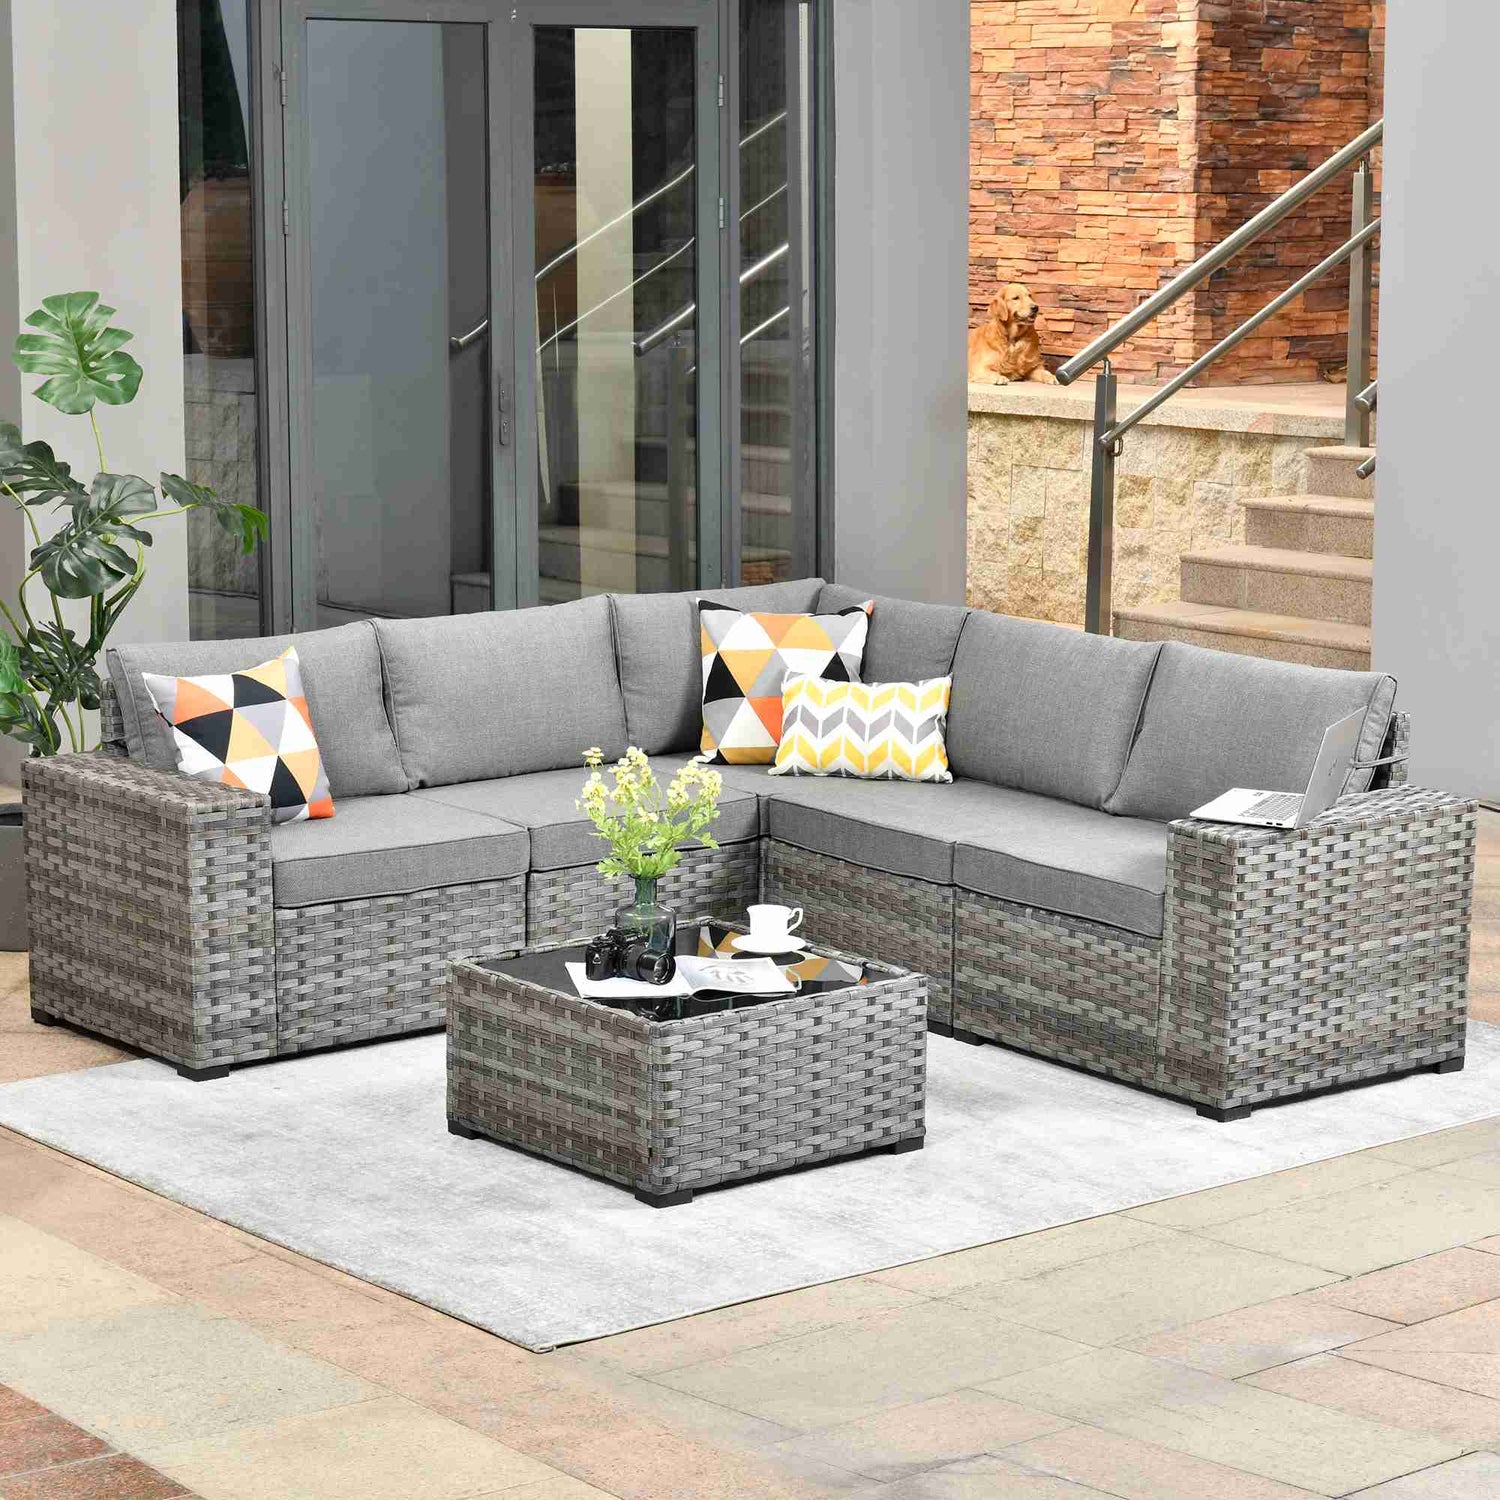 15 Essential Patio Accessories to Transform Your Outdoor Living Space